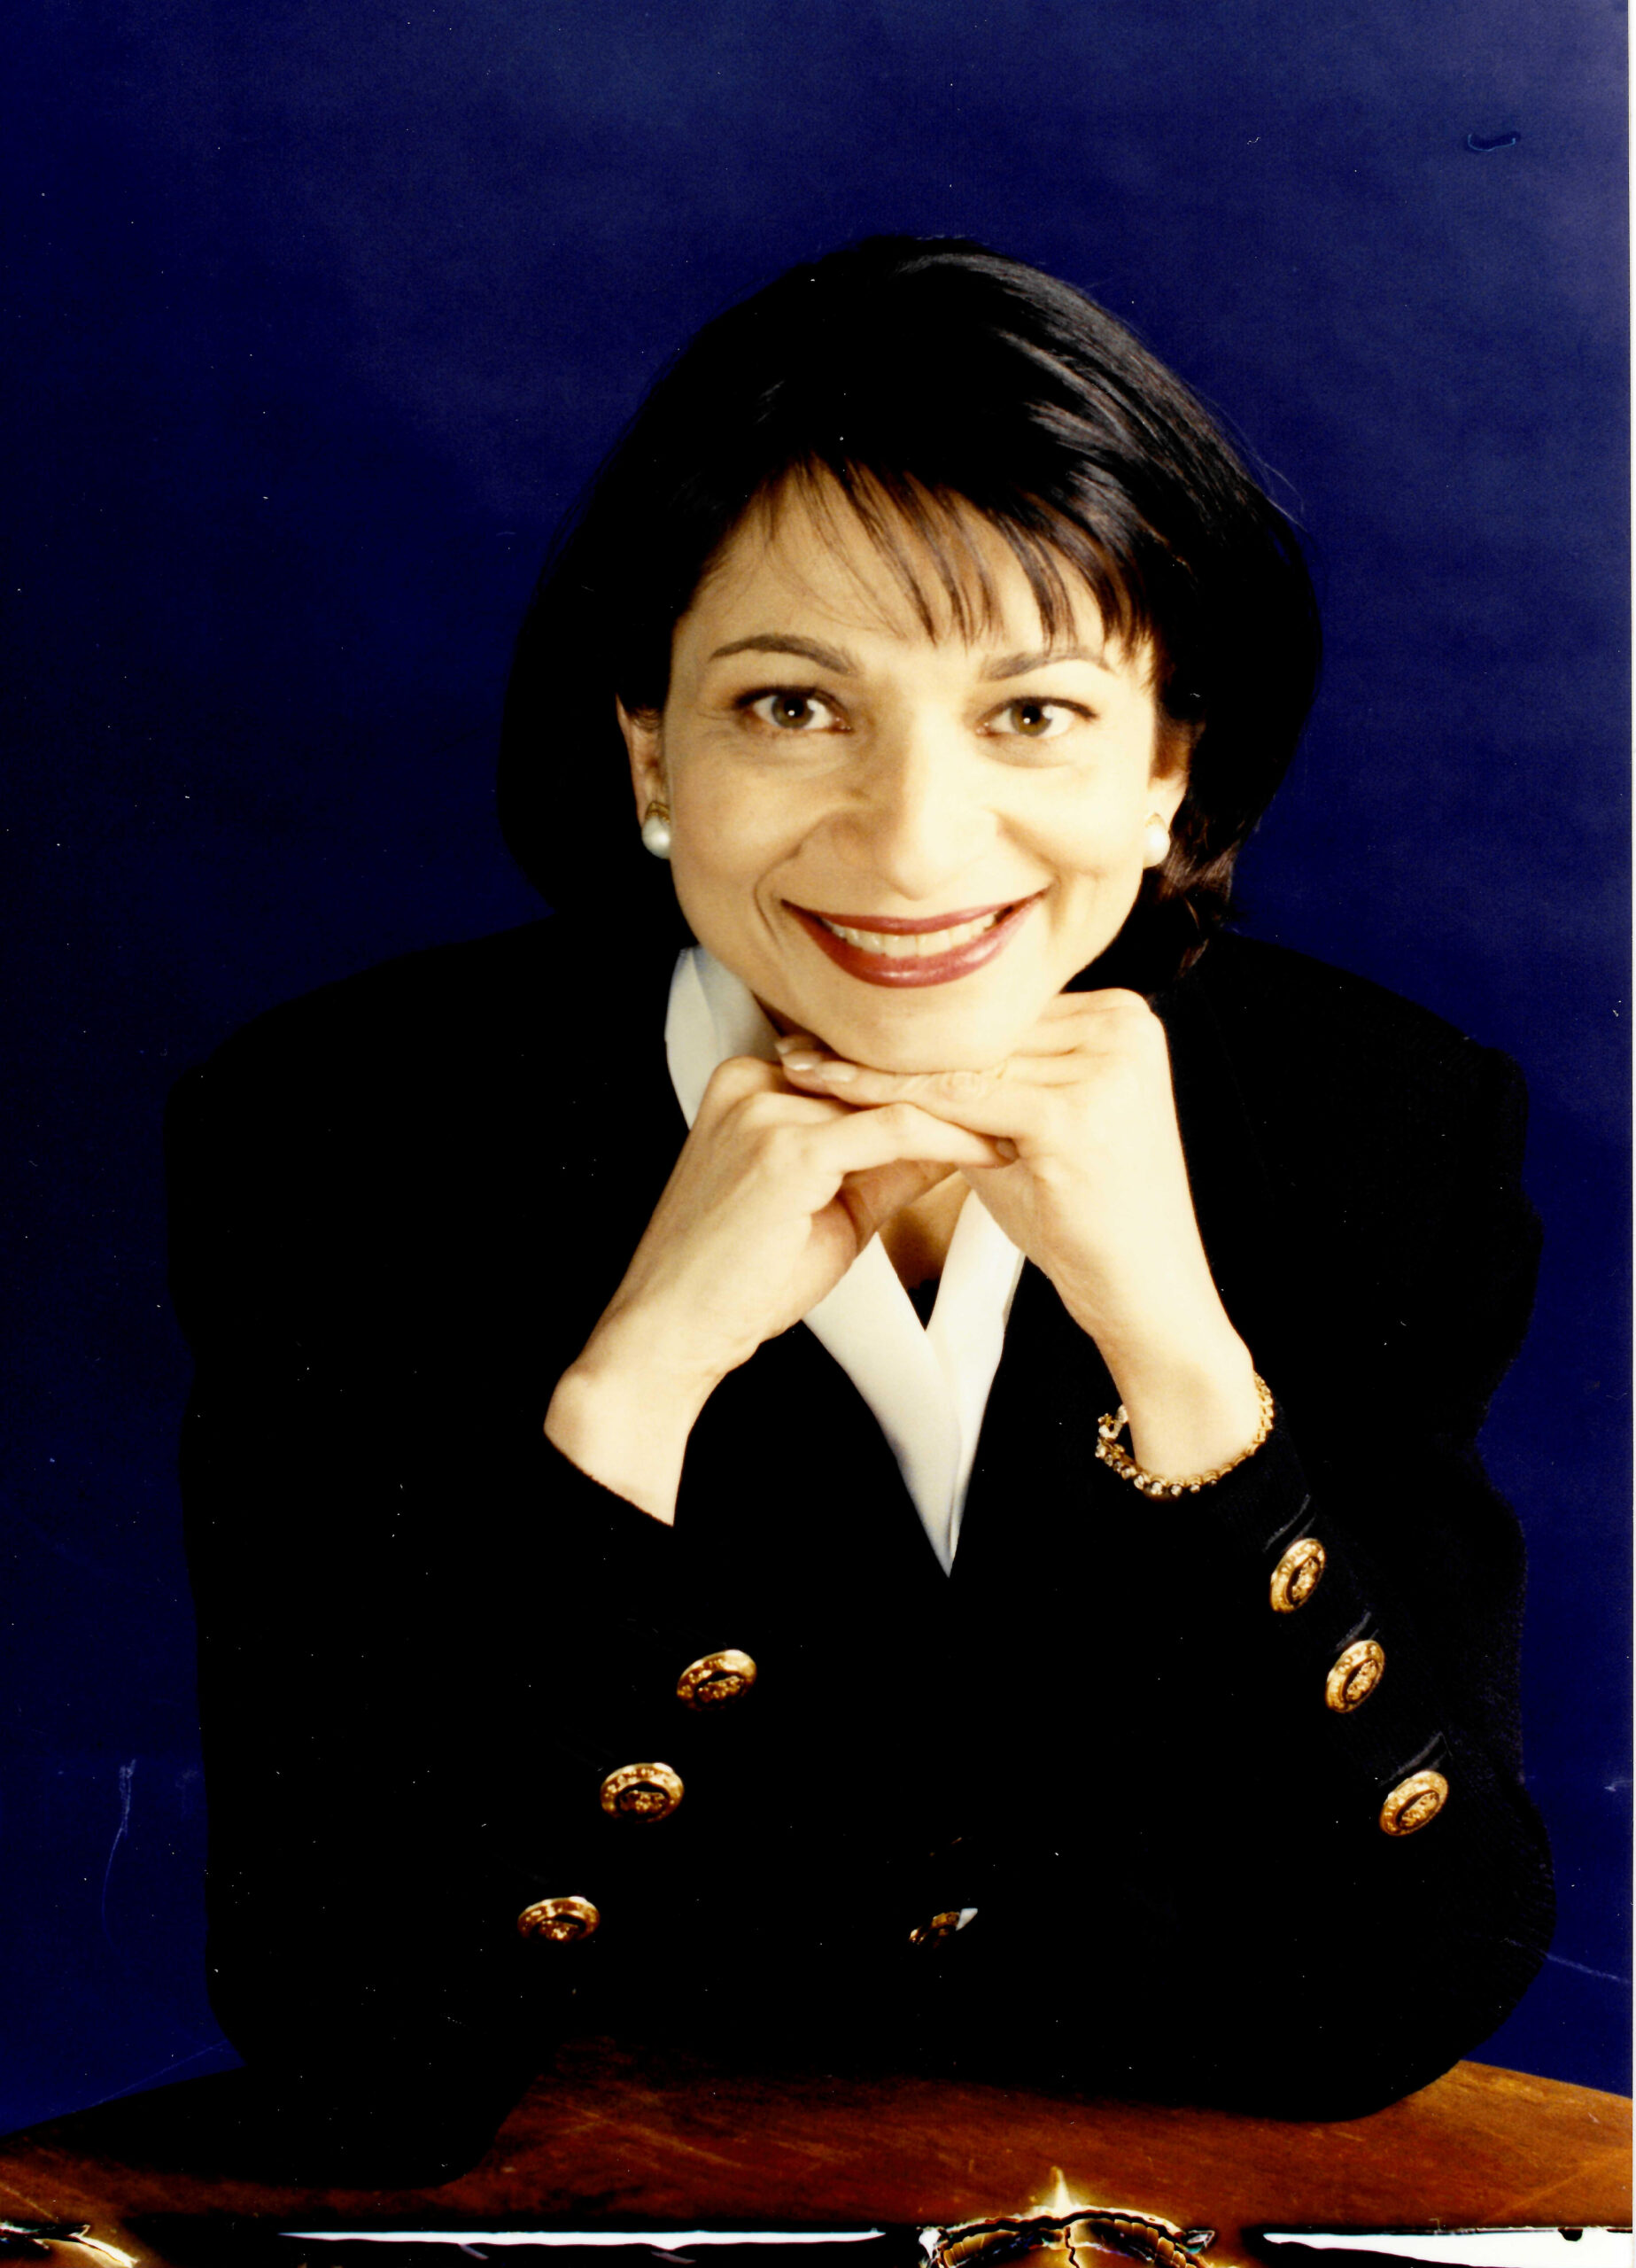 Anu Saad headshot wearing a black blazer with gold buttons